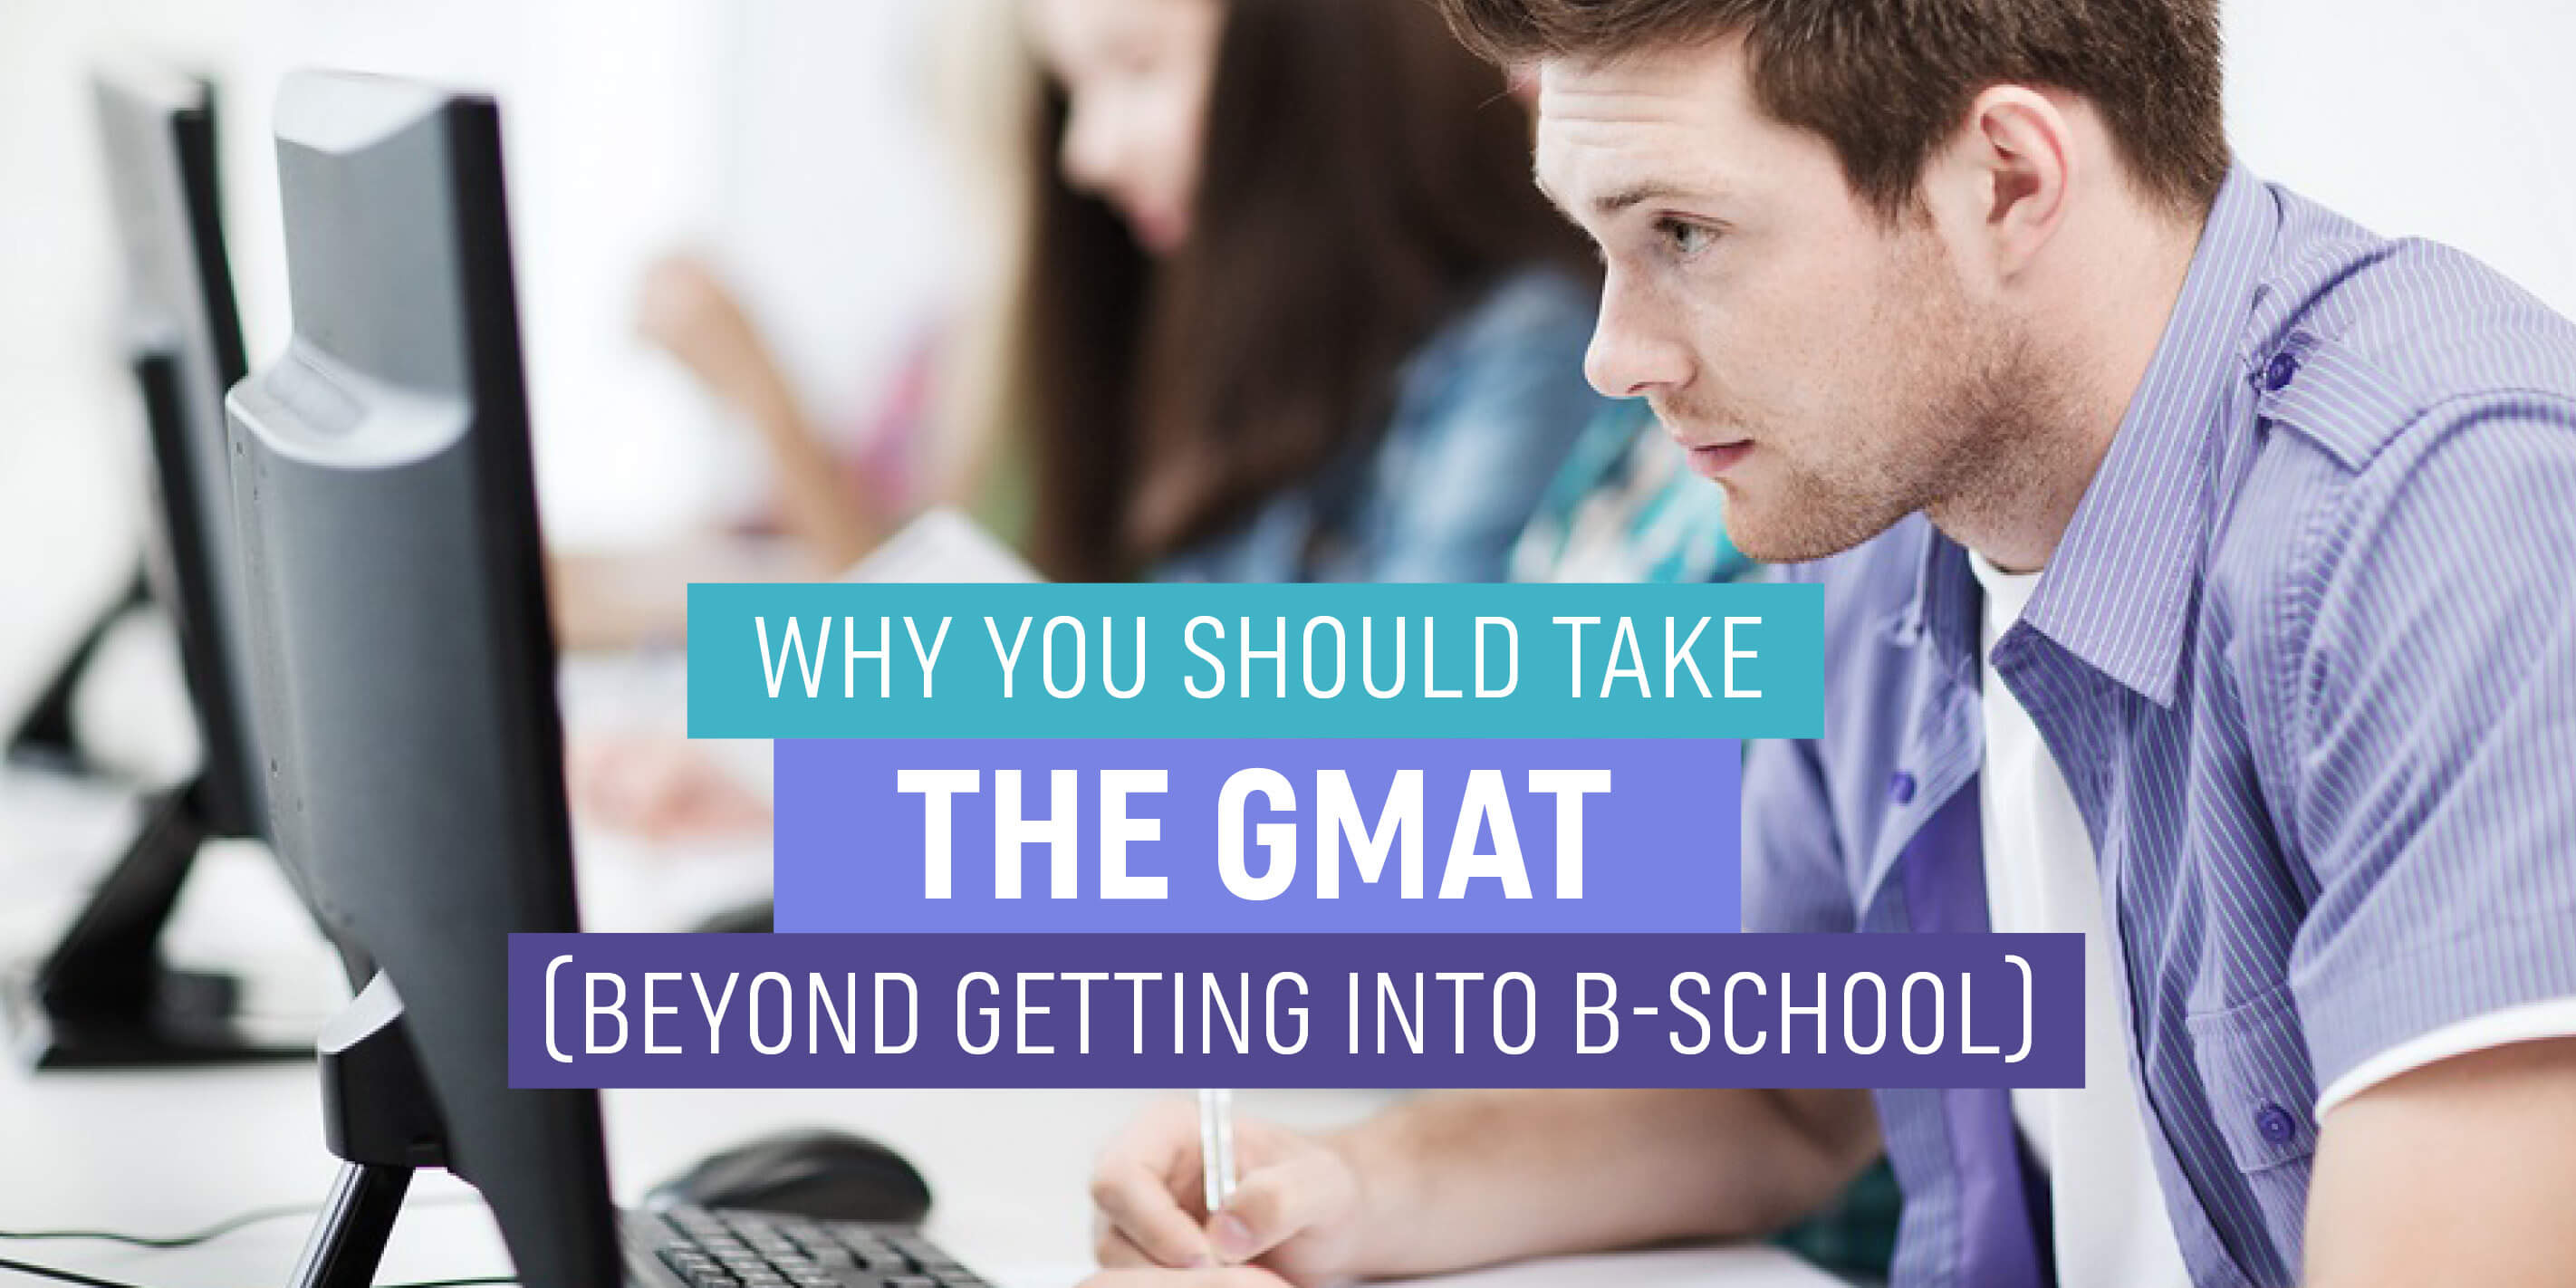 Why You Should Take the GMAT (Beyond Getting into B-School)